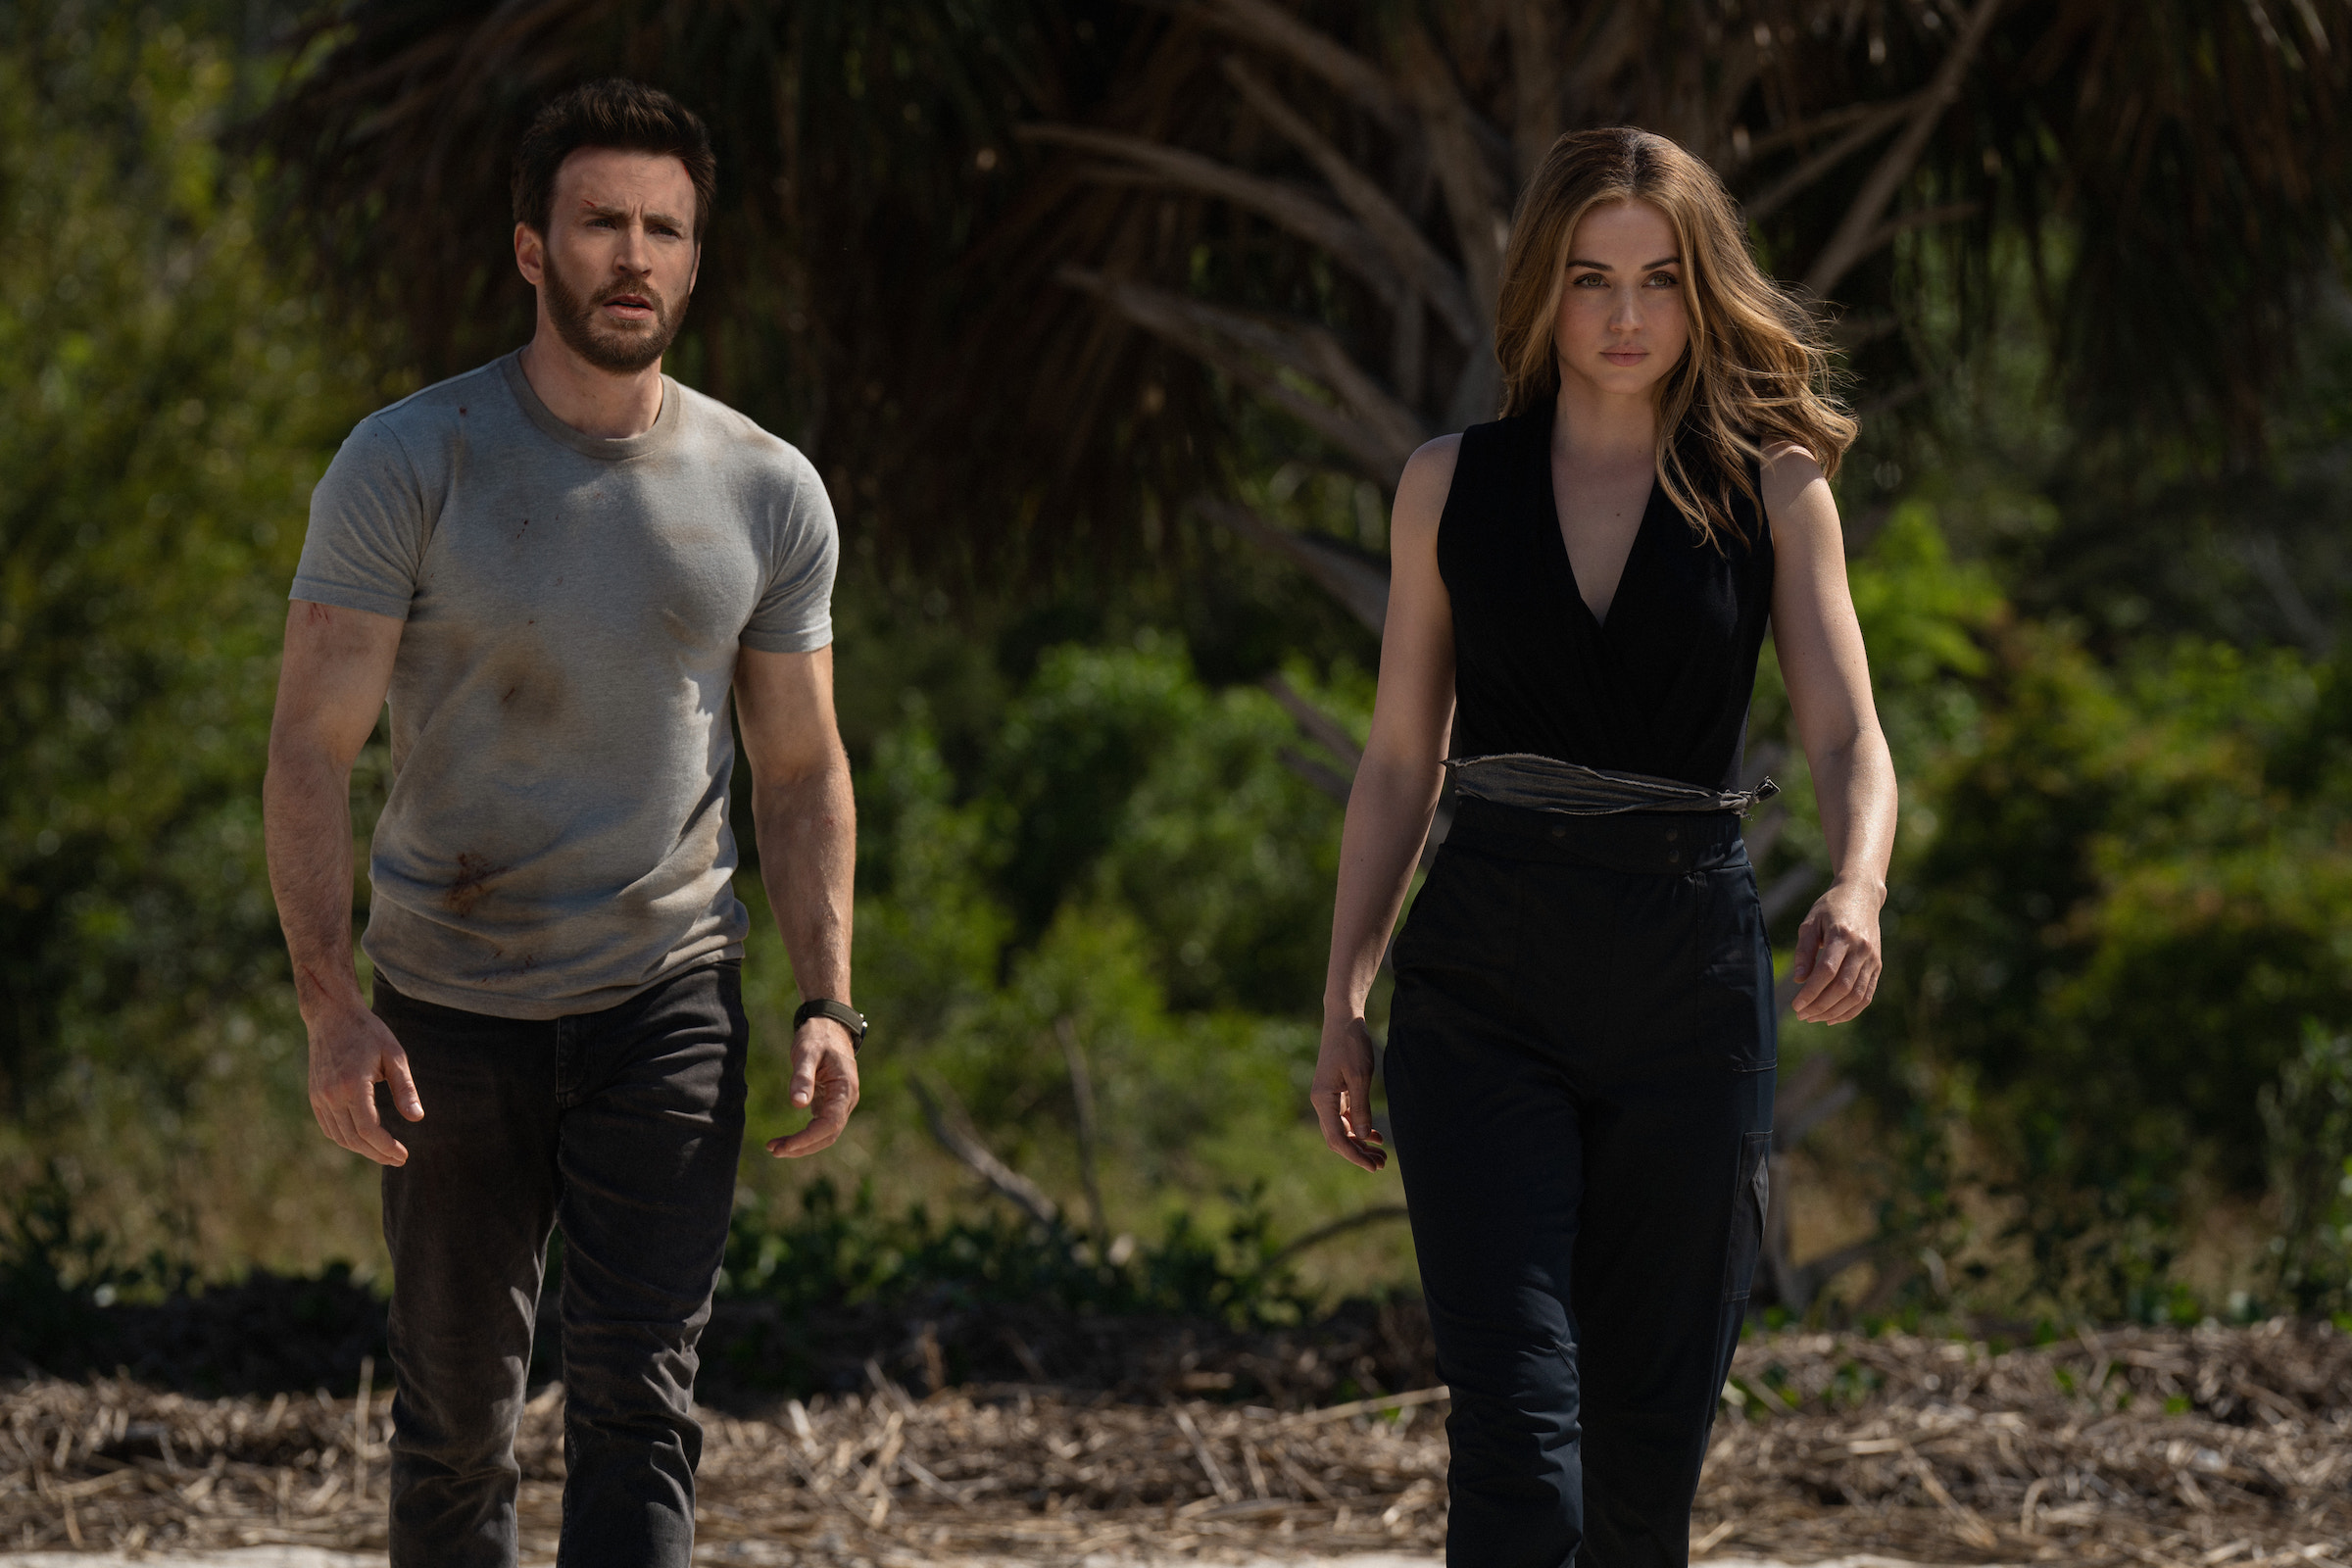 Chris Evans and Ana de Armas in the not half-bad but not great 'Ghosted' (Courtesy of Apple TV+)